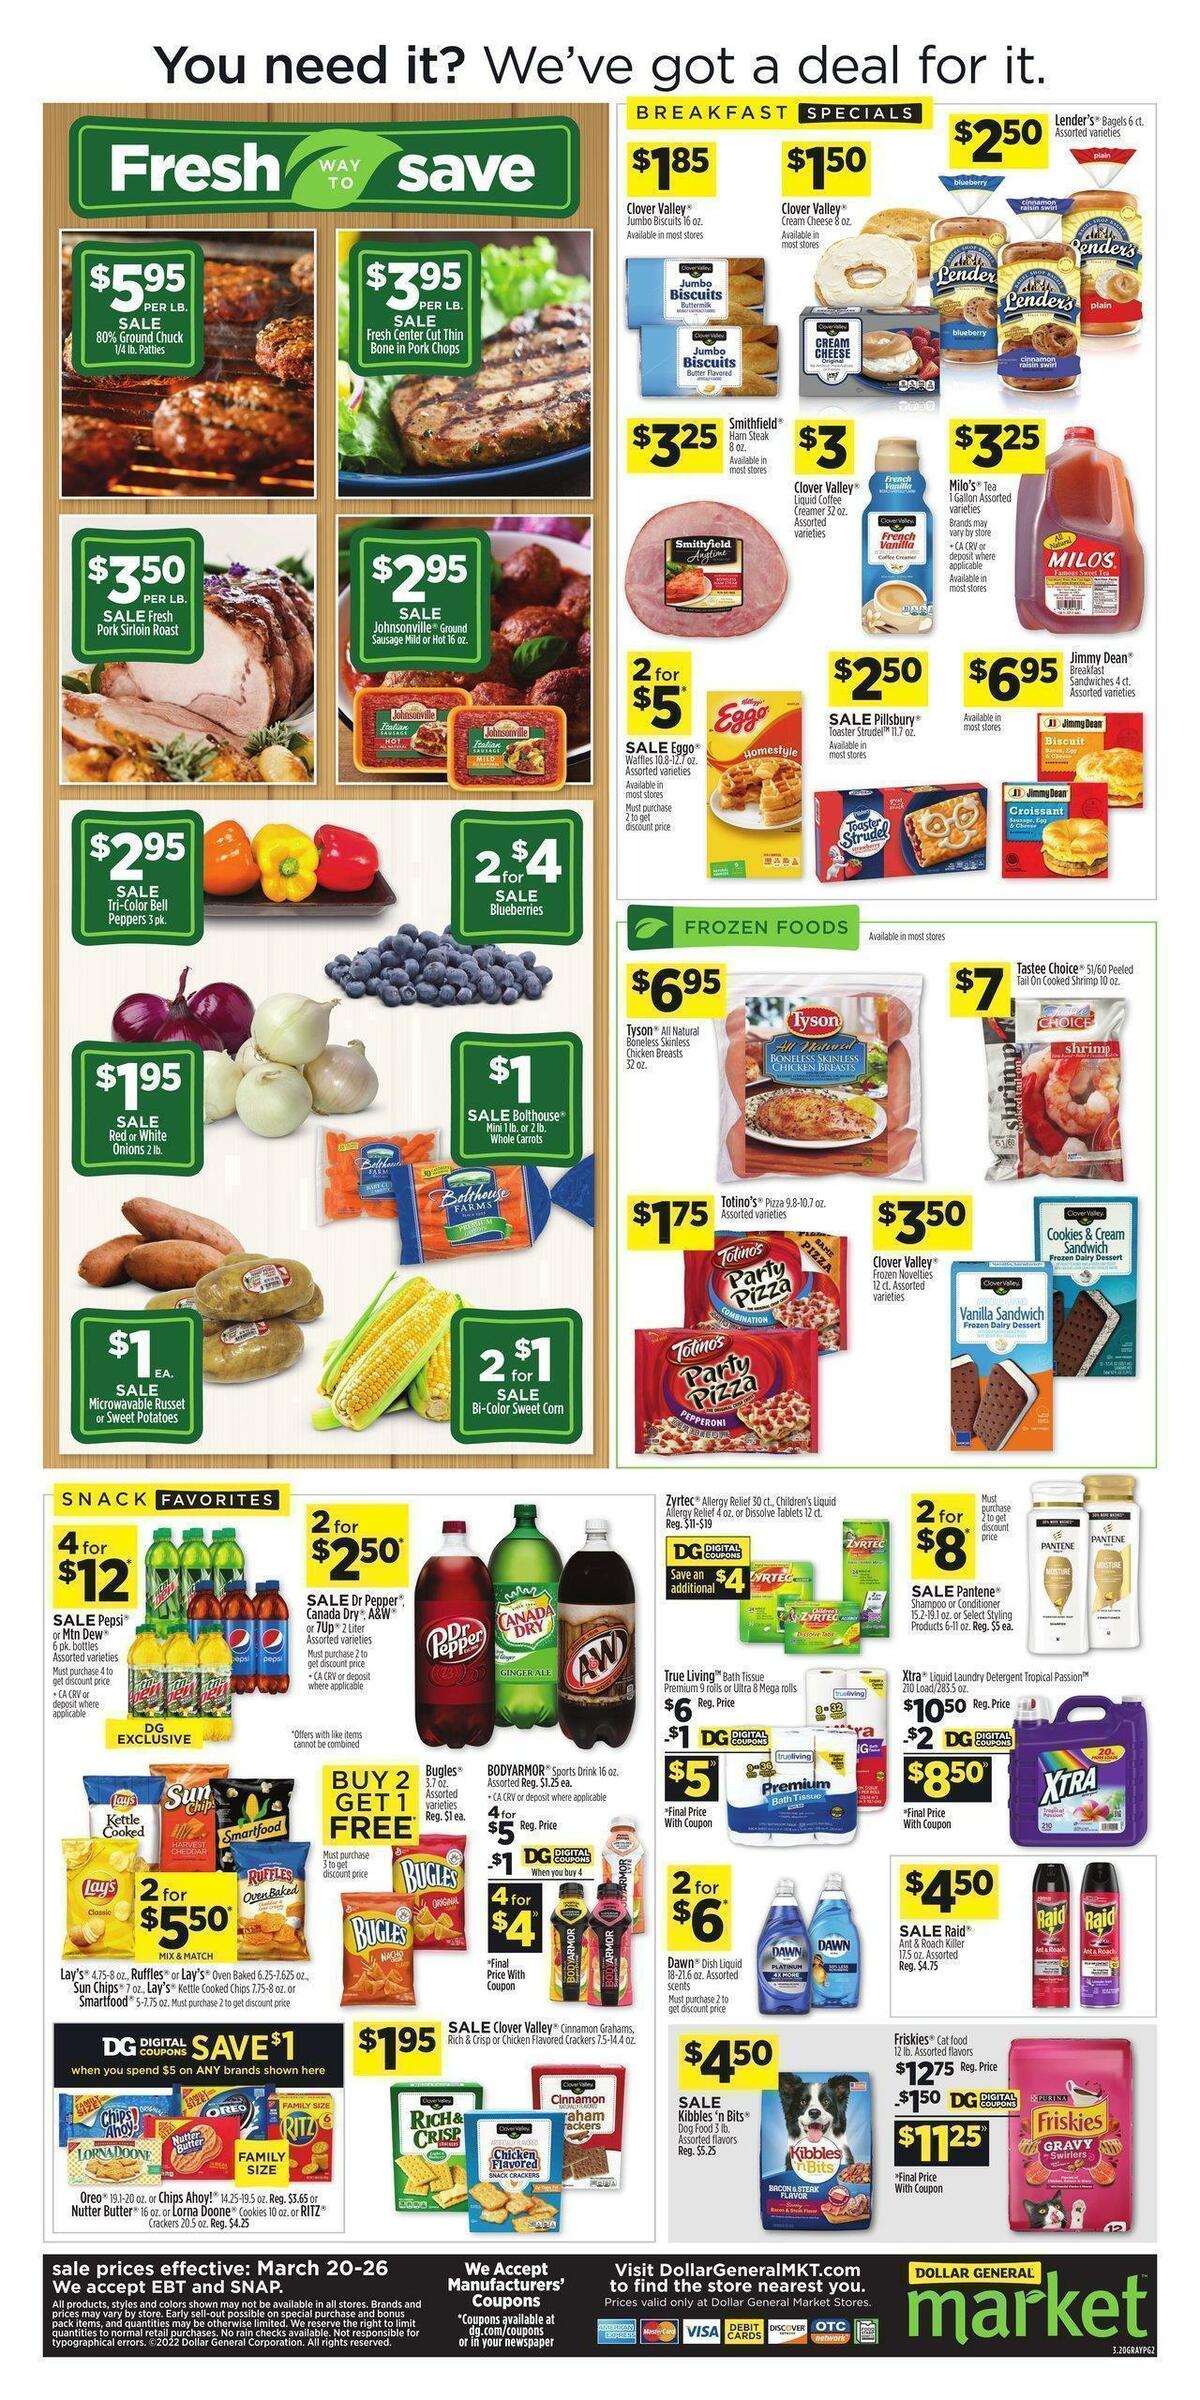 Dollar General Market Ad Weekly Ad from March 20